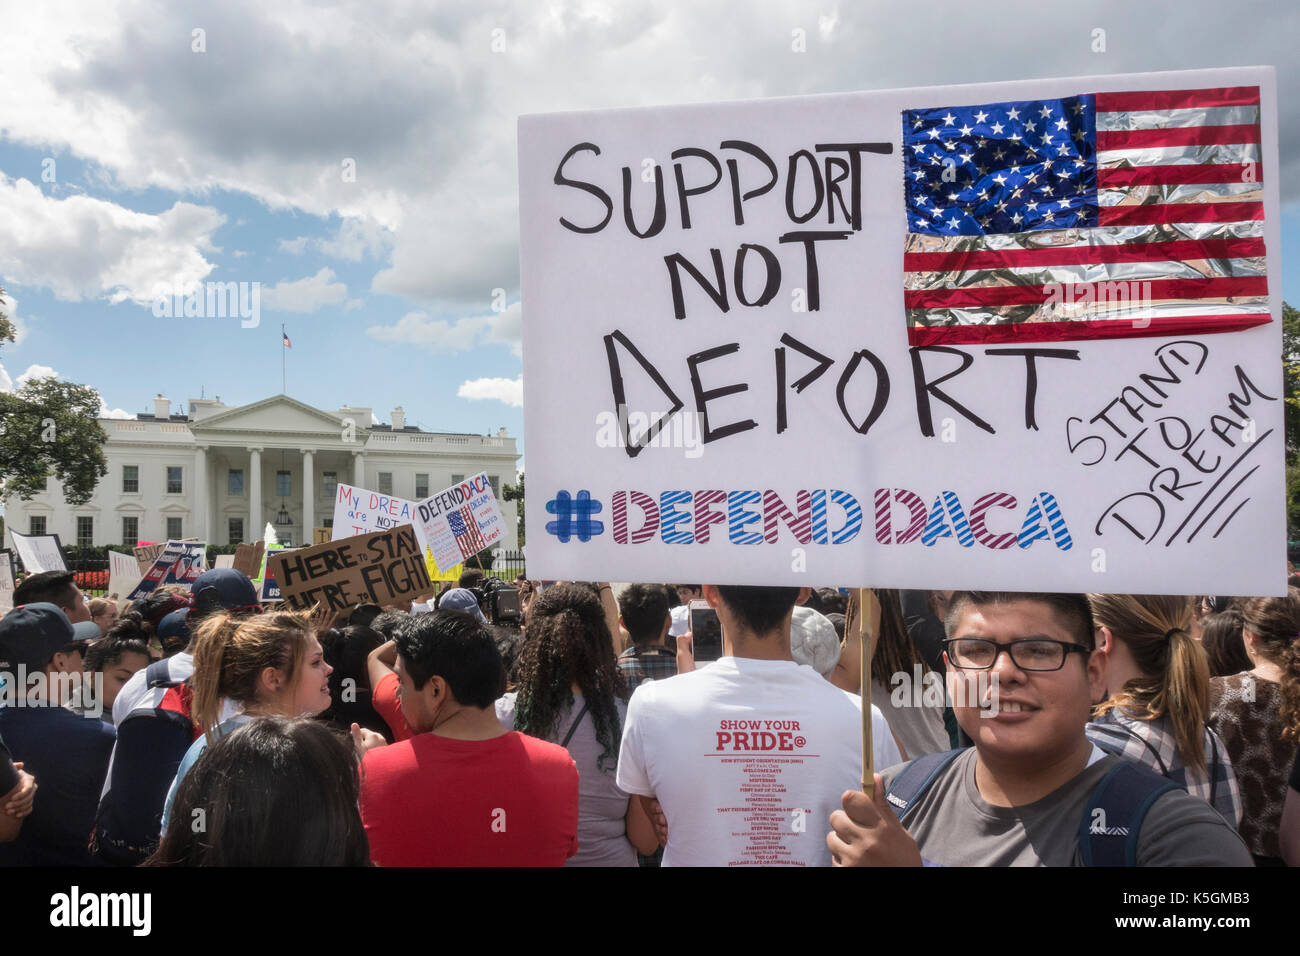 Washington, DC, USA. 9th September, 2017. Demonstrators in front of the White House protest President Donald Trump's decision to phase out DACA, the Deferred Action for Childhood Arrivals program, which has provided work permits for approximately 800,000 undocumented immigrants who were brought to the United States as young children. Bob Korn/Alamy Live News Stock Photo